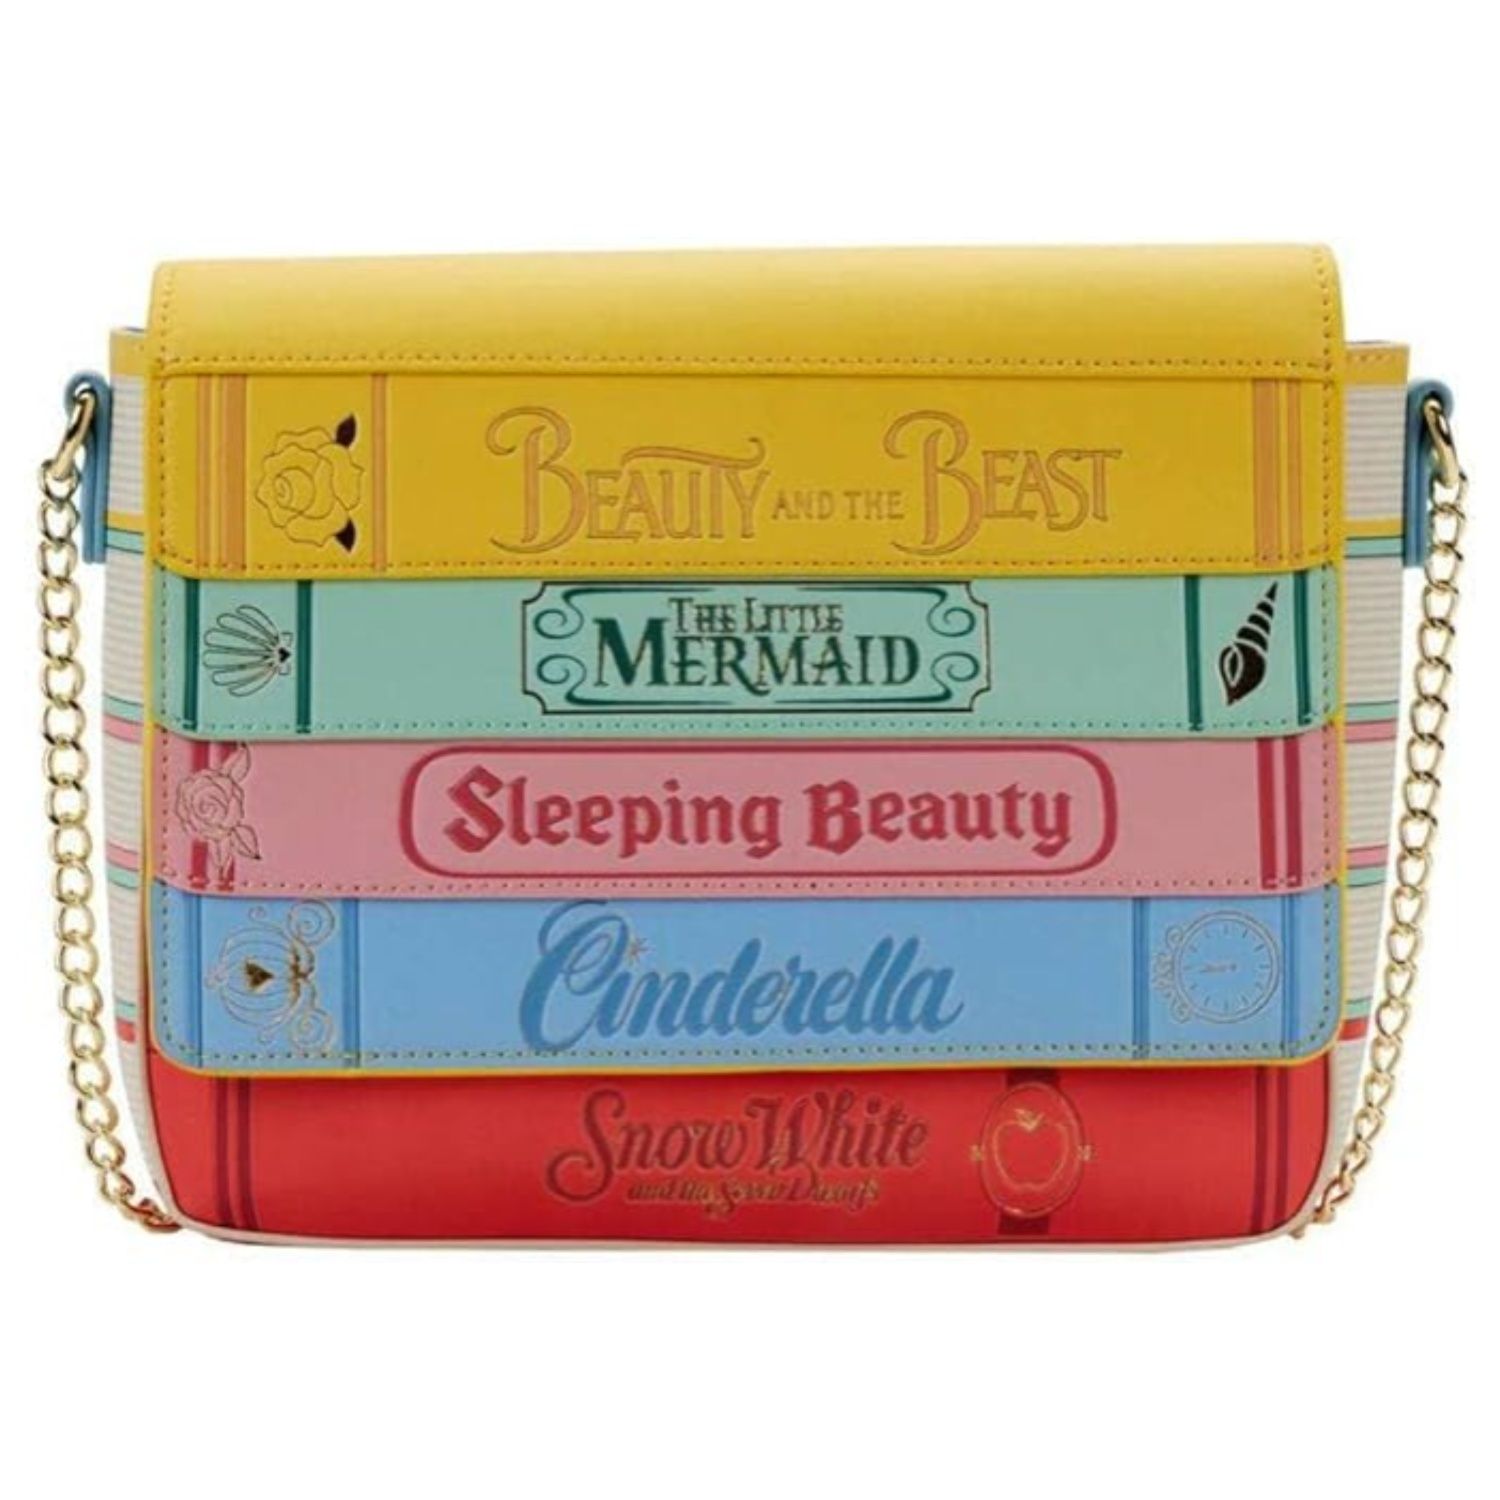 Sold Out! These Cinderella Loungefly Bags are Instantly Hard-to-Find